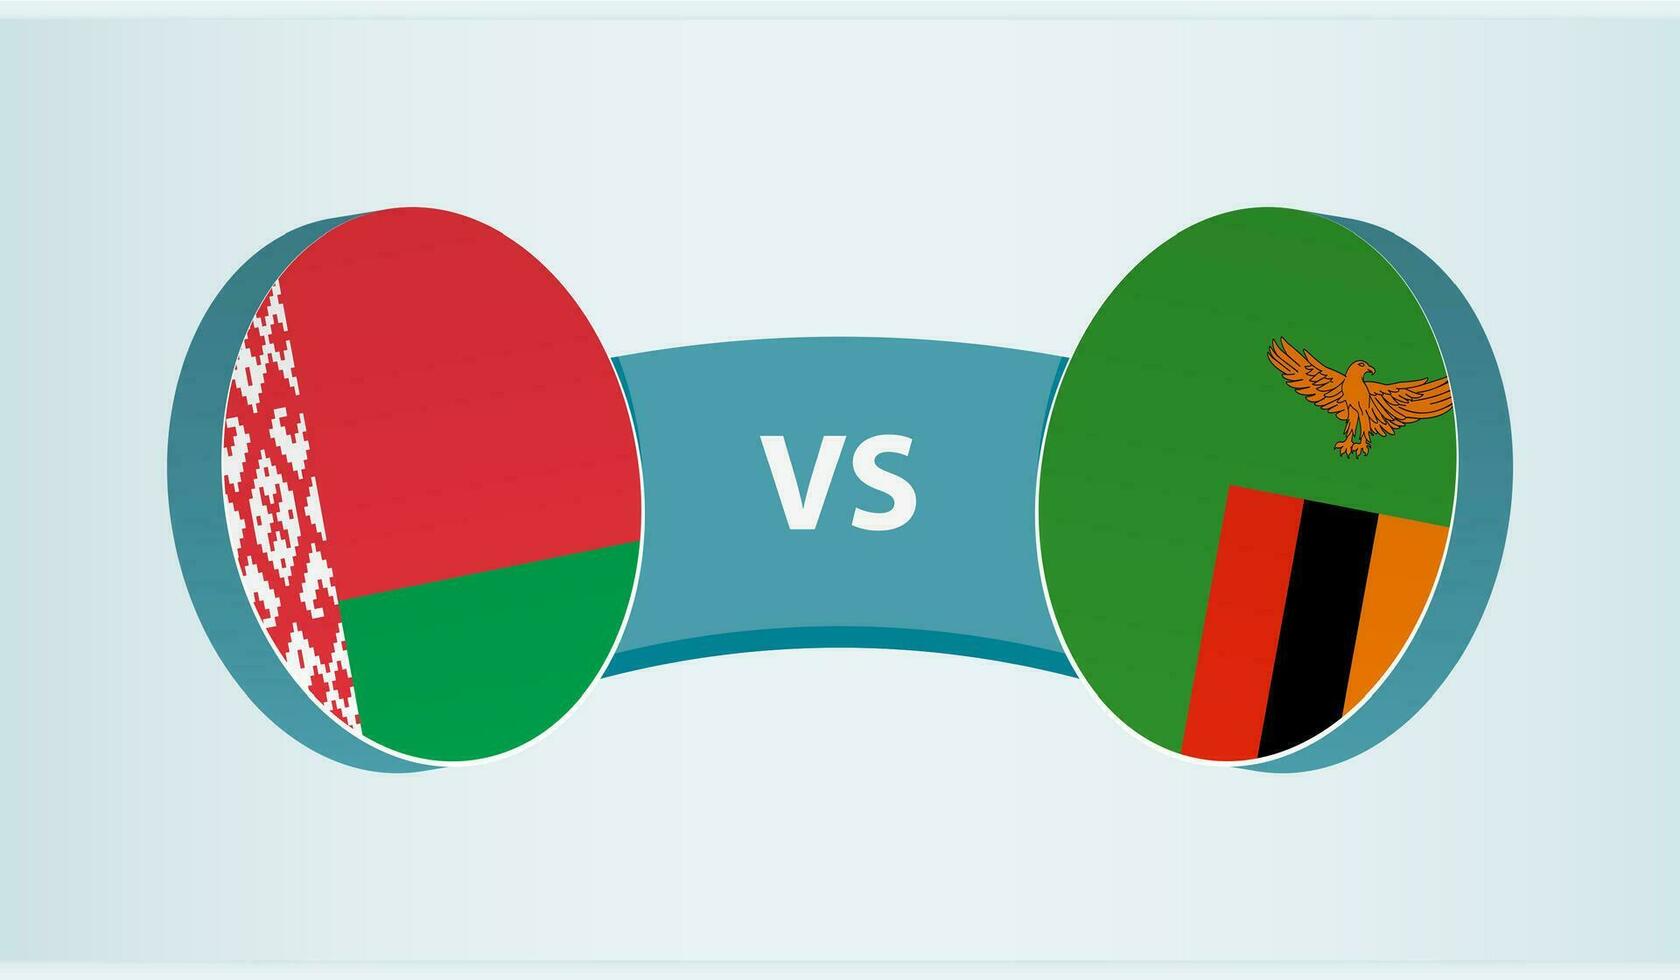 Belarus versus Zambia, team sports competition concept. vector